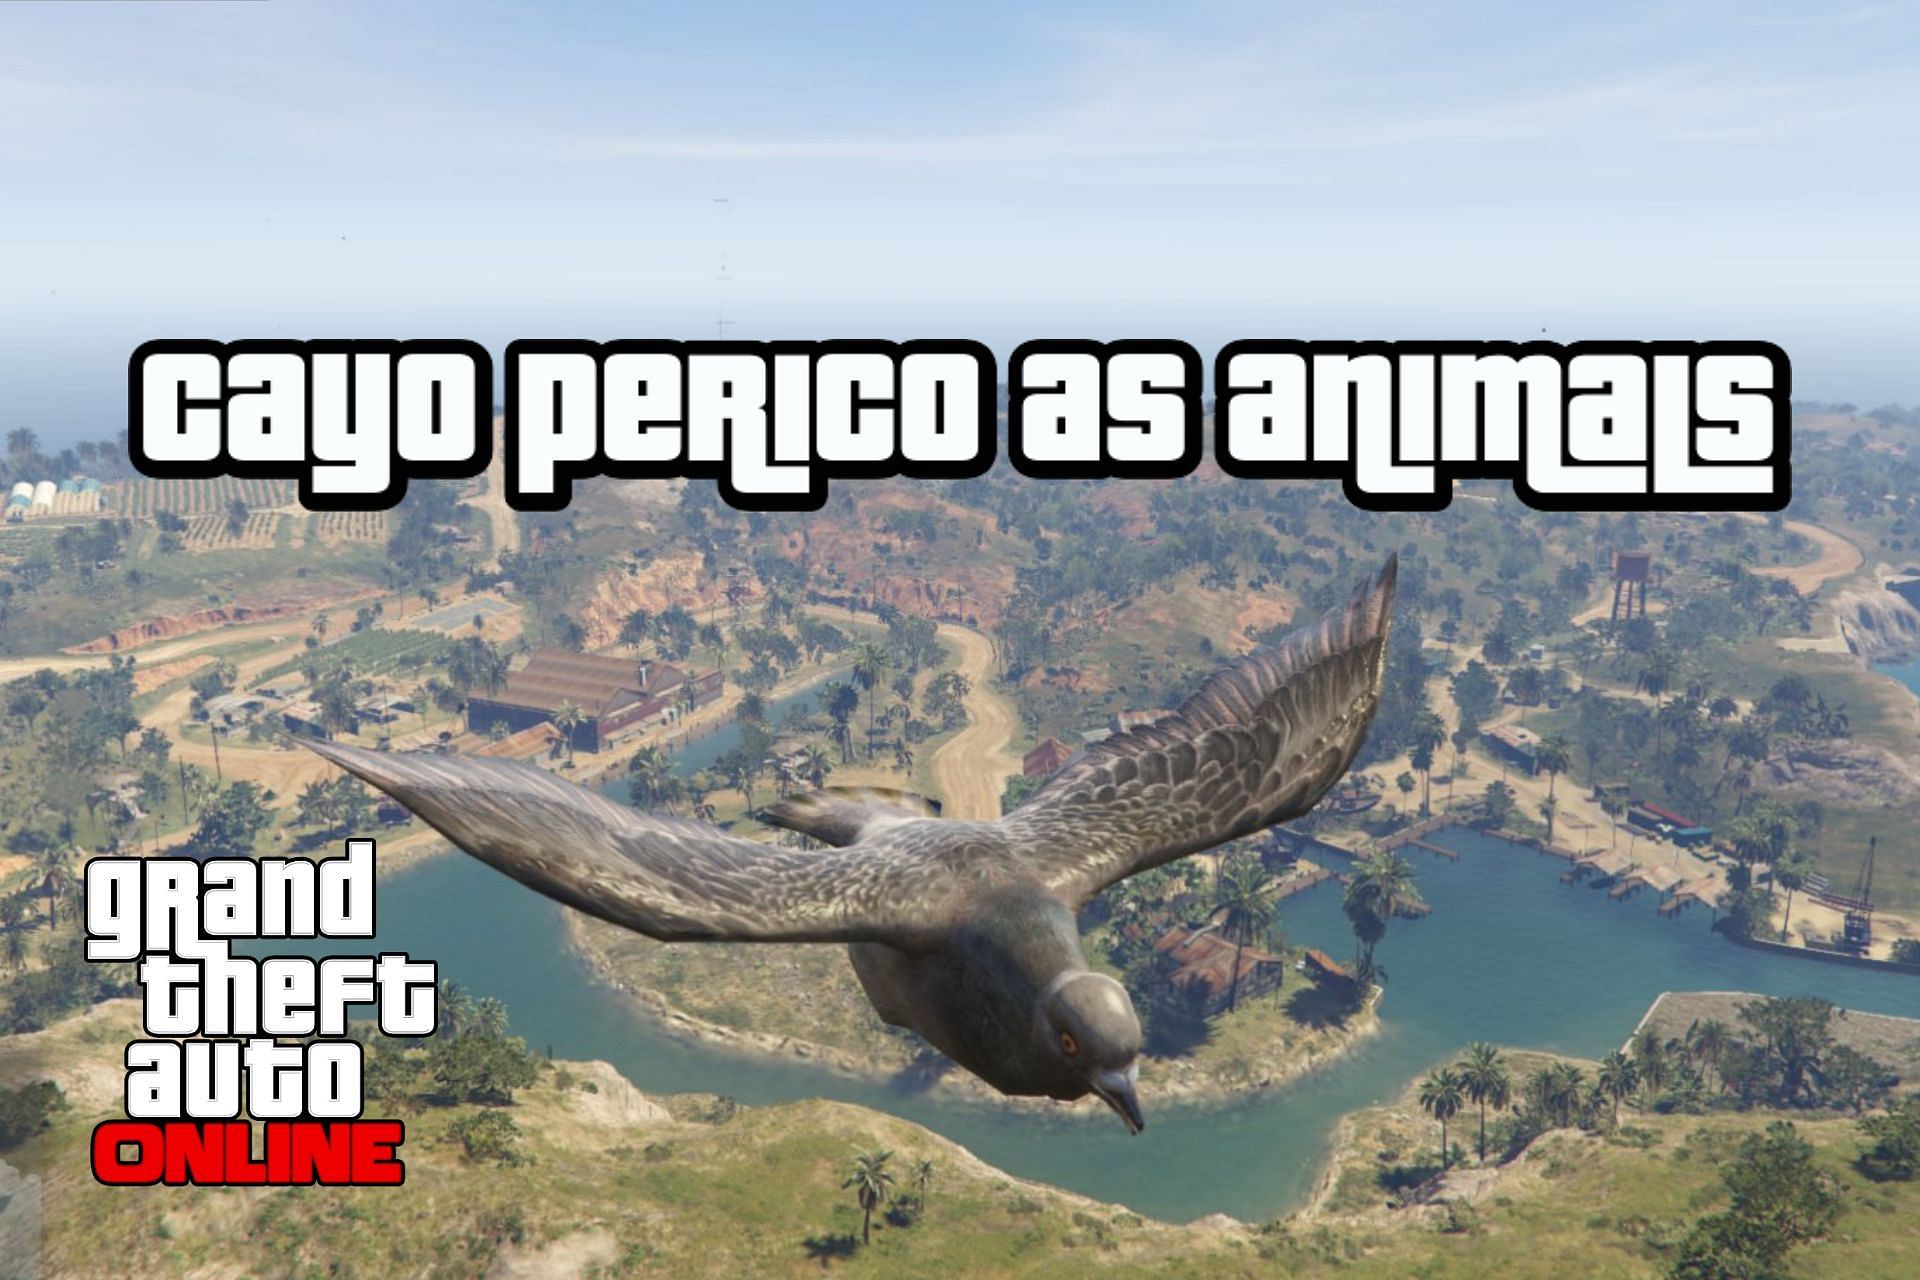 Visiting the Cayo Perico island as animals is the newest trend in GTA Online (Image via Twitter)